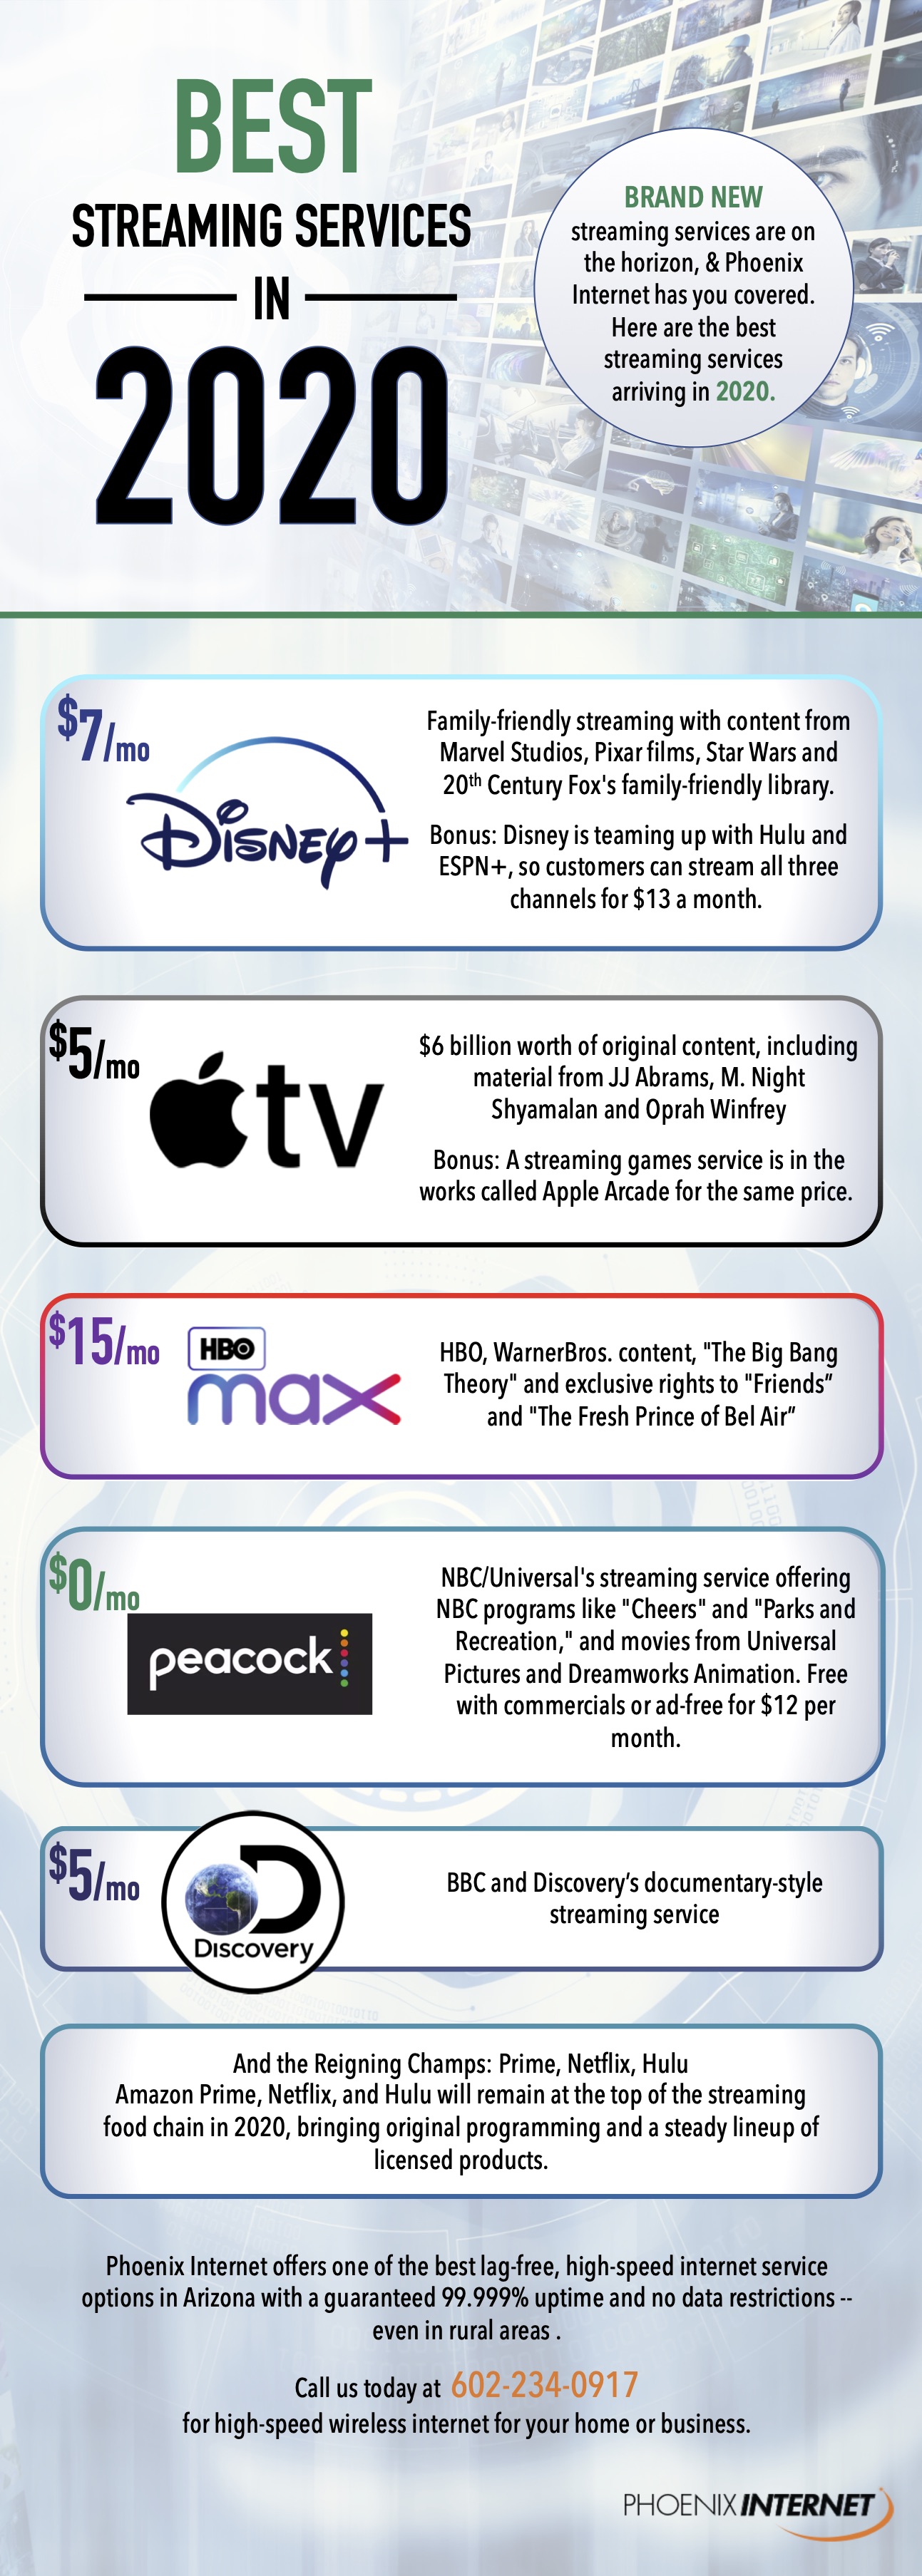 2020 streaming, best streaming services for 2020, what streaming services should i have for 2020